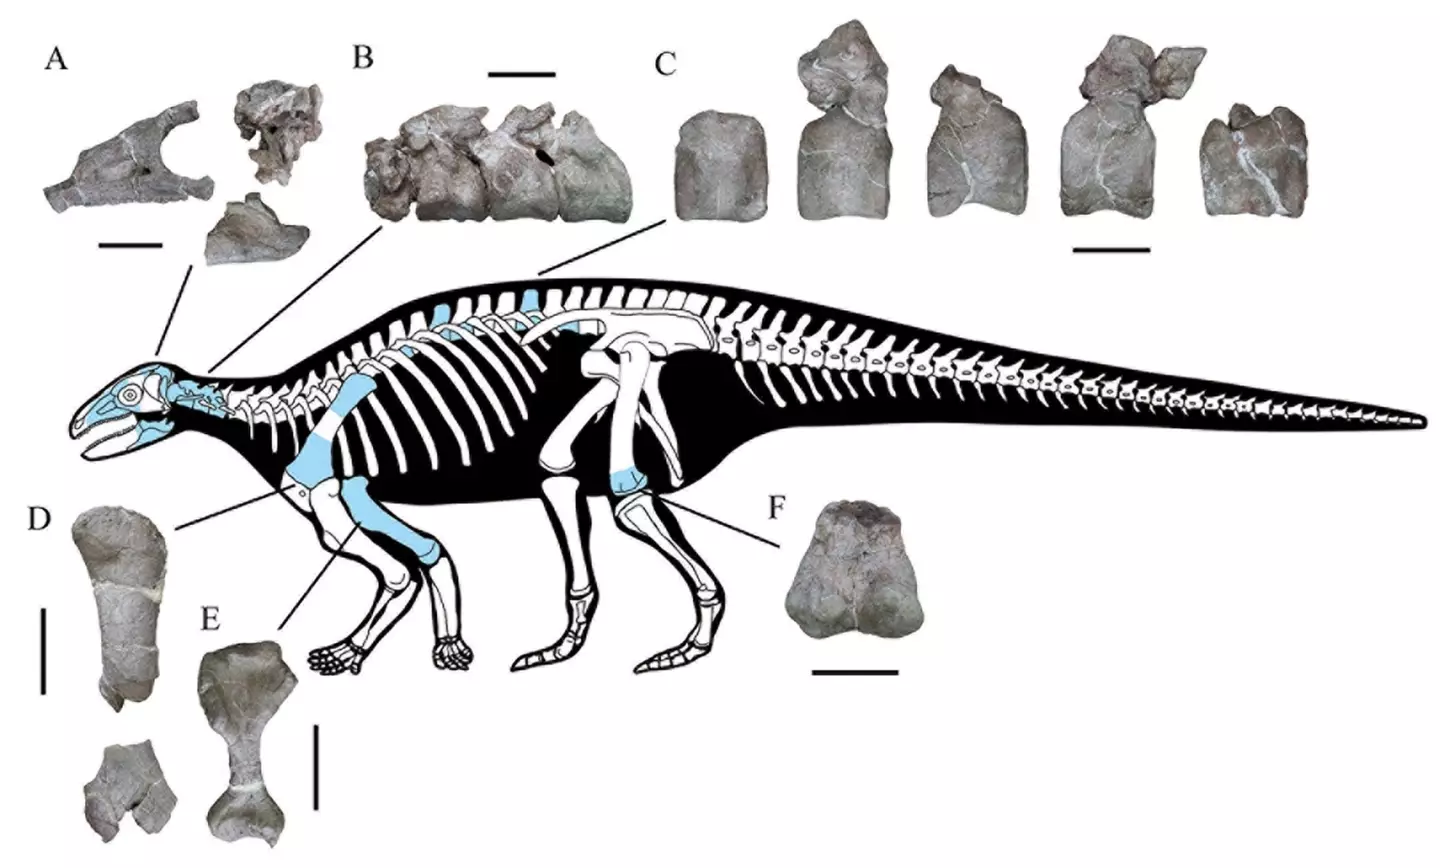 Various parts of the Yuxisaurus kopchicki’s body were unearthed. (Xi Yao)